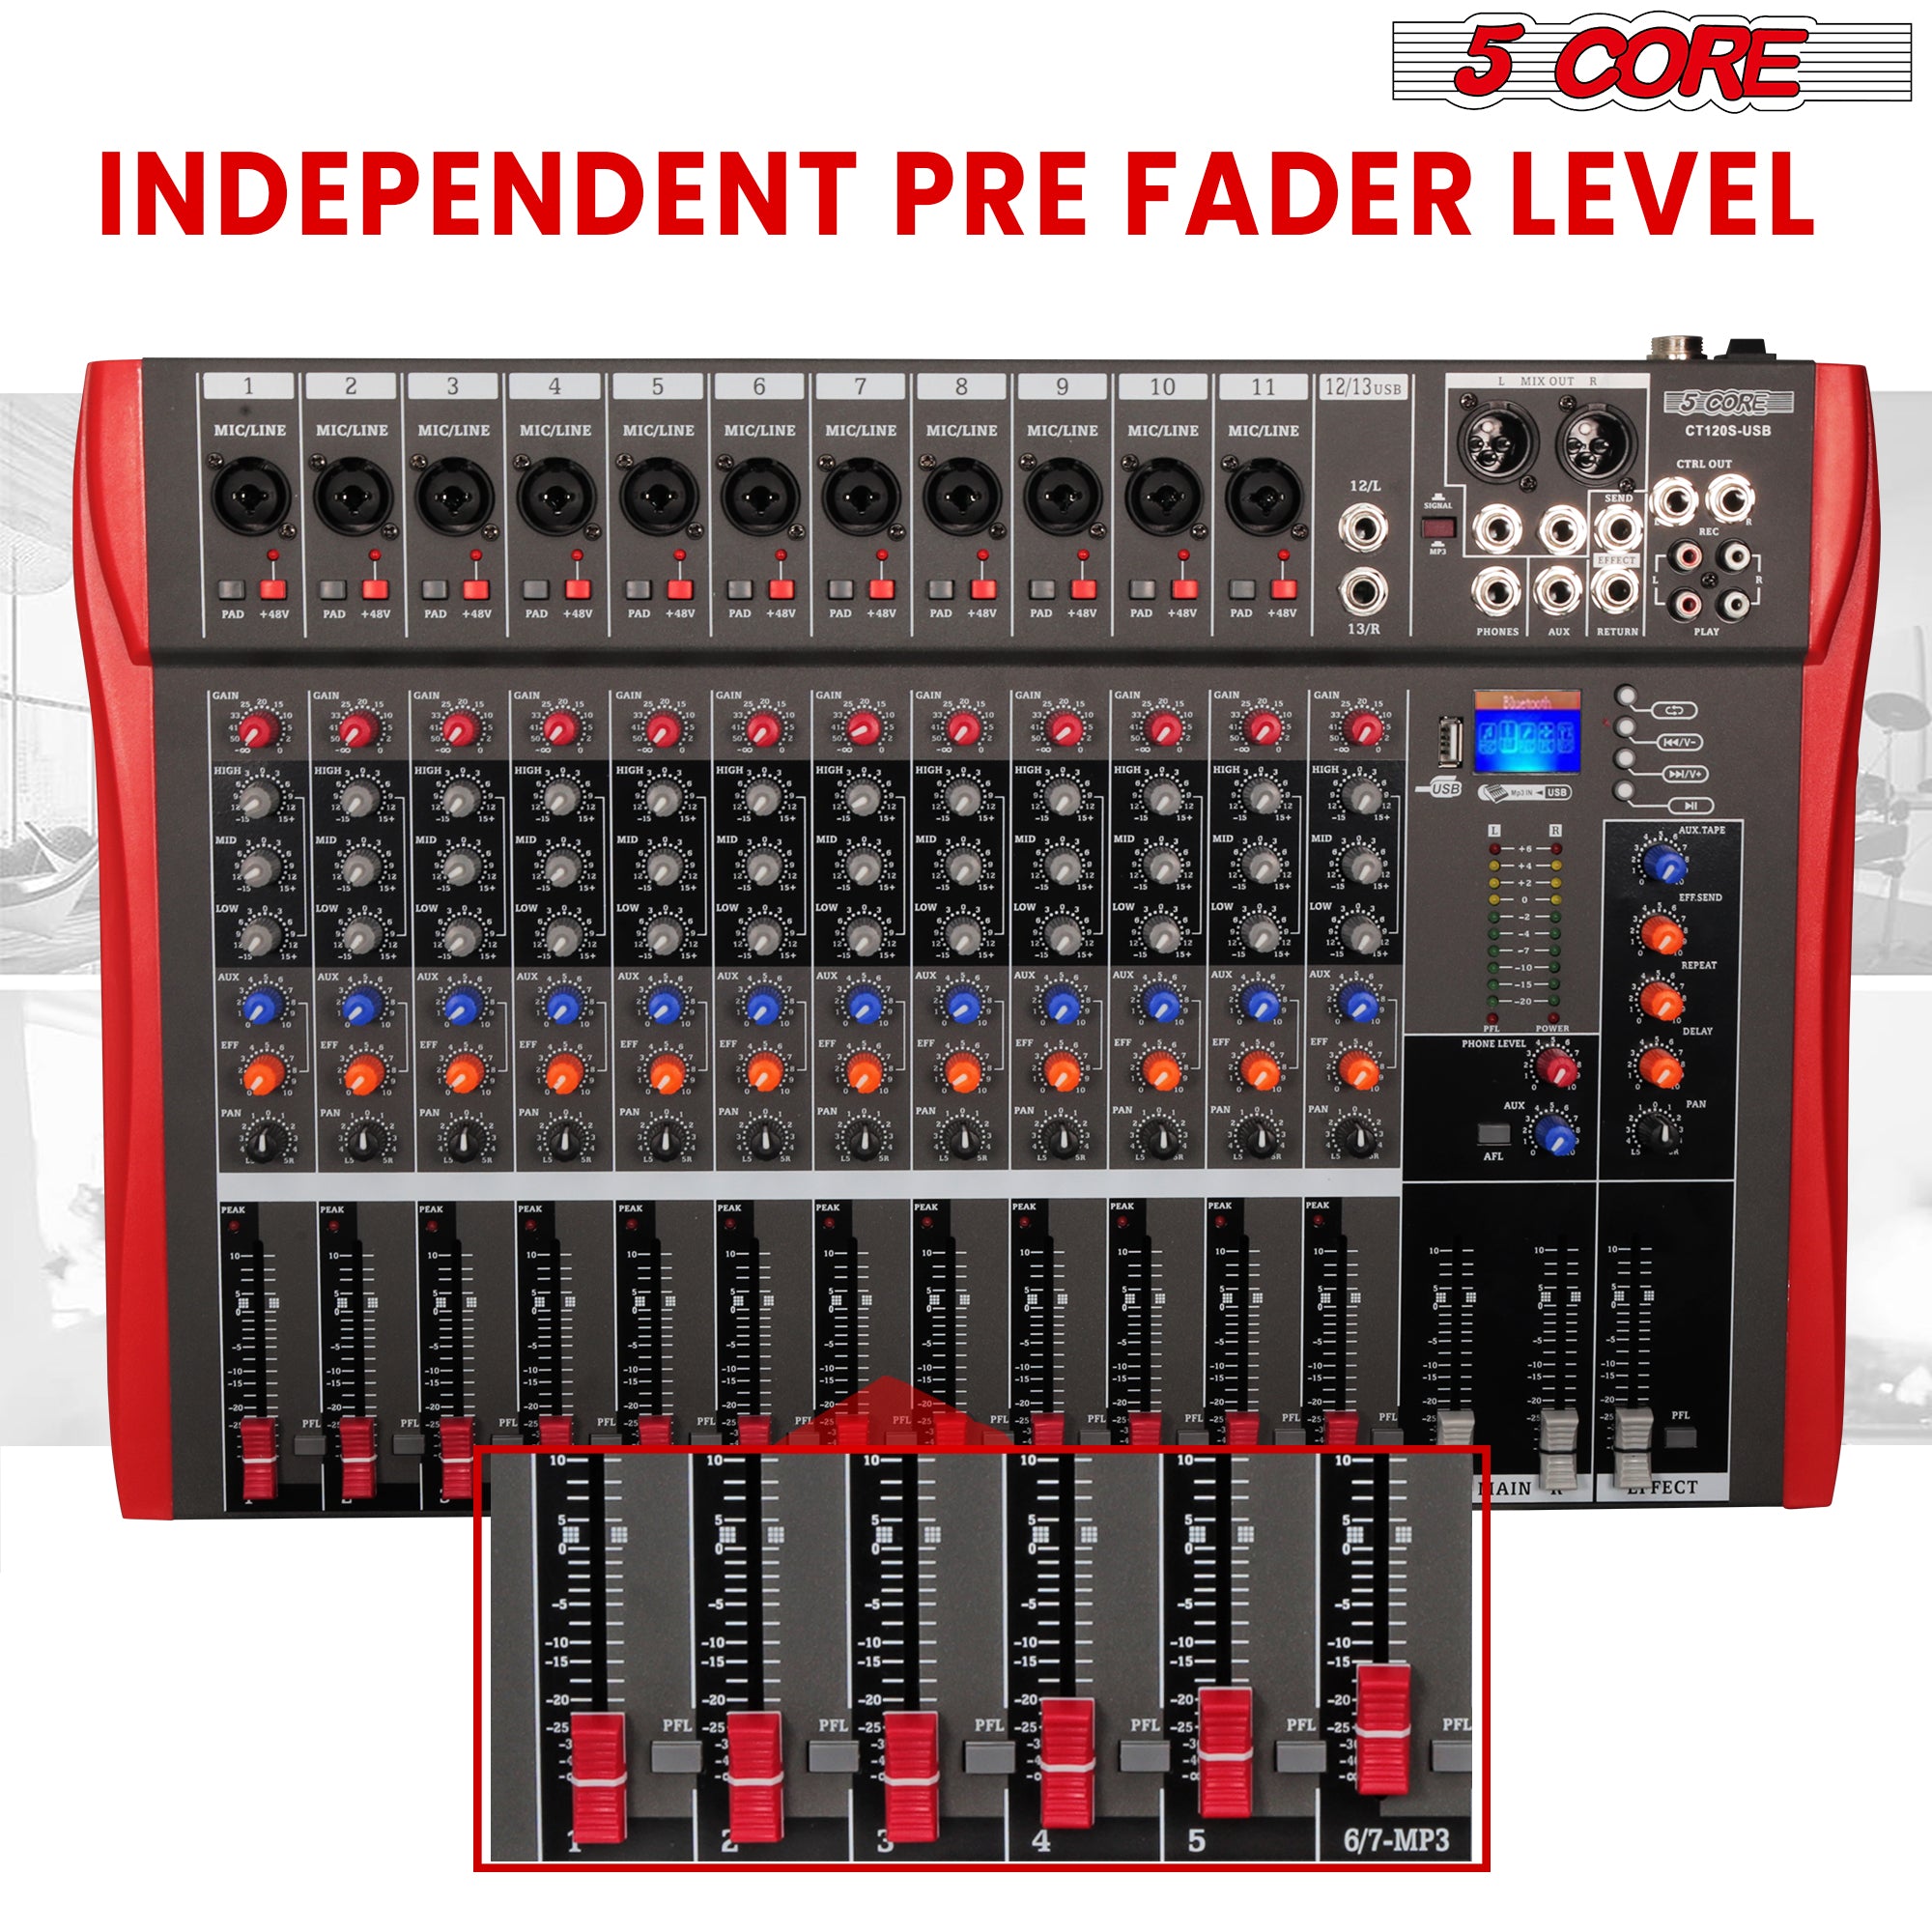 This Audio Mixer has Independent Pre Feder Level.